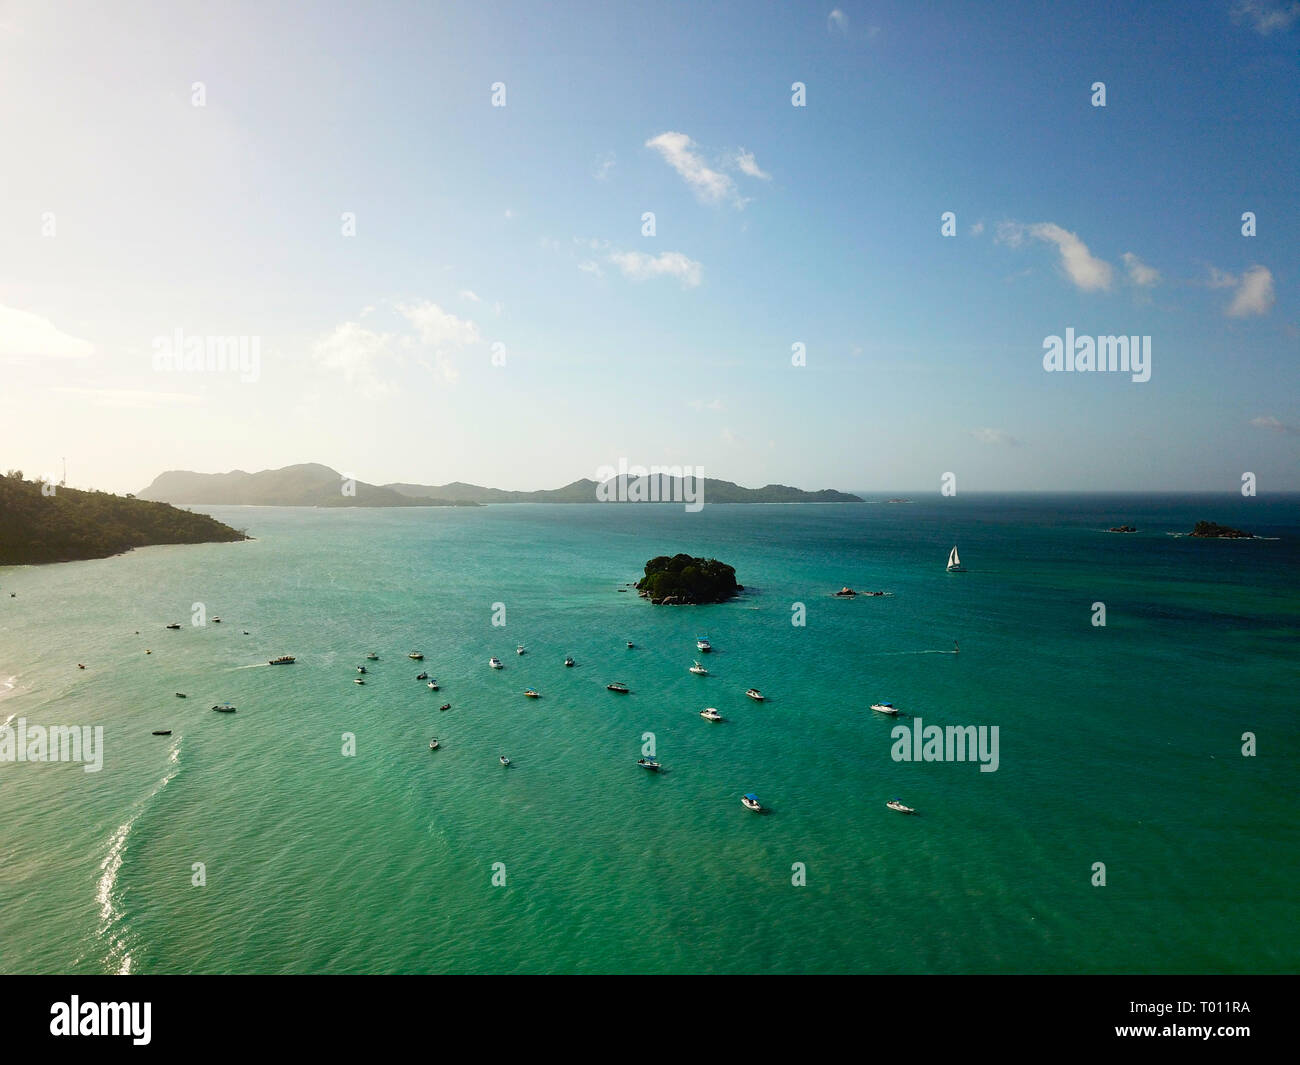 Many boats near the coast of Praslin. Curious Island, a sailing yacht and the horizon in the backround. Stock Photo